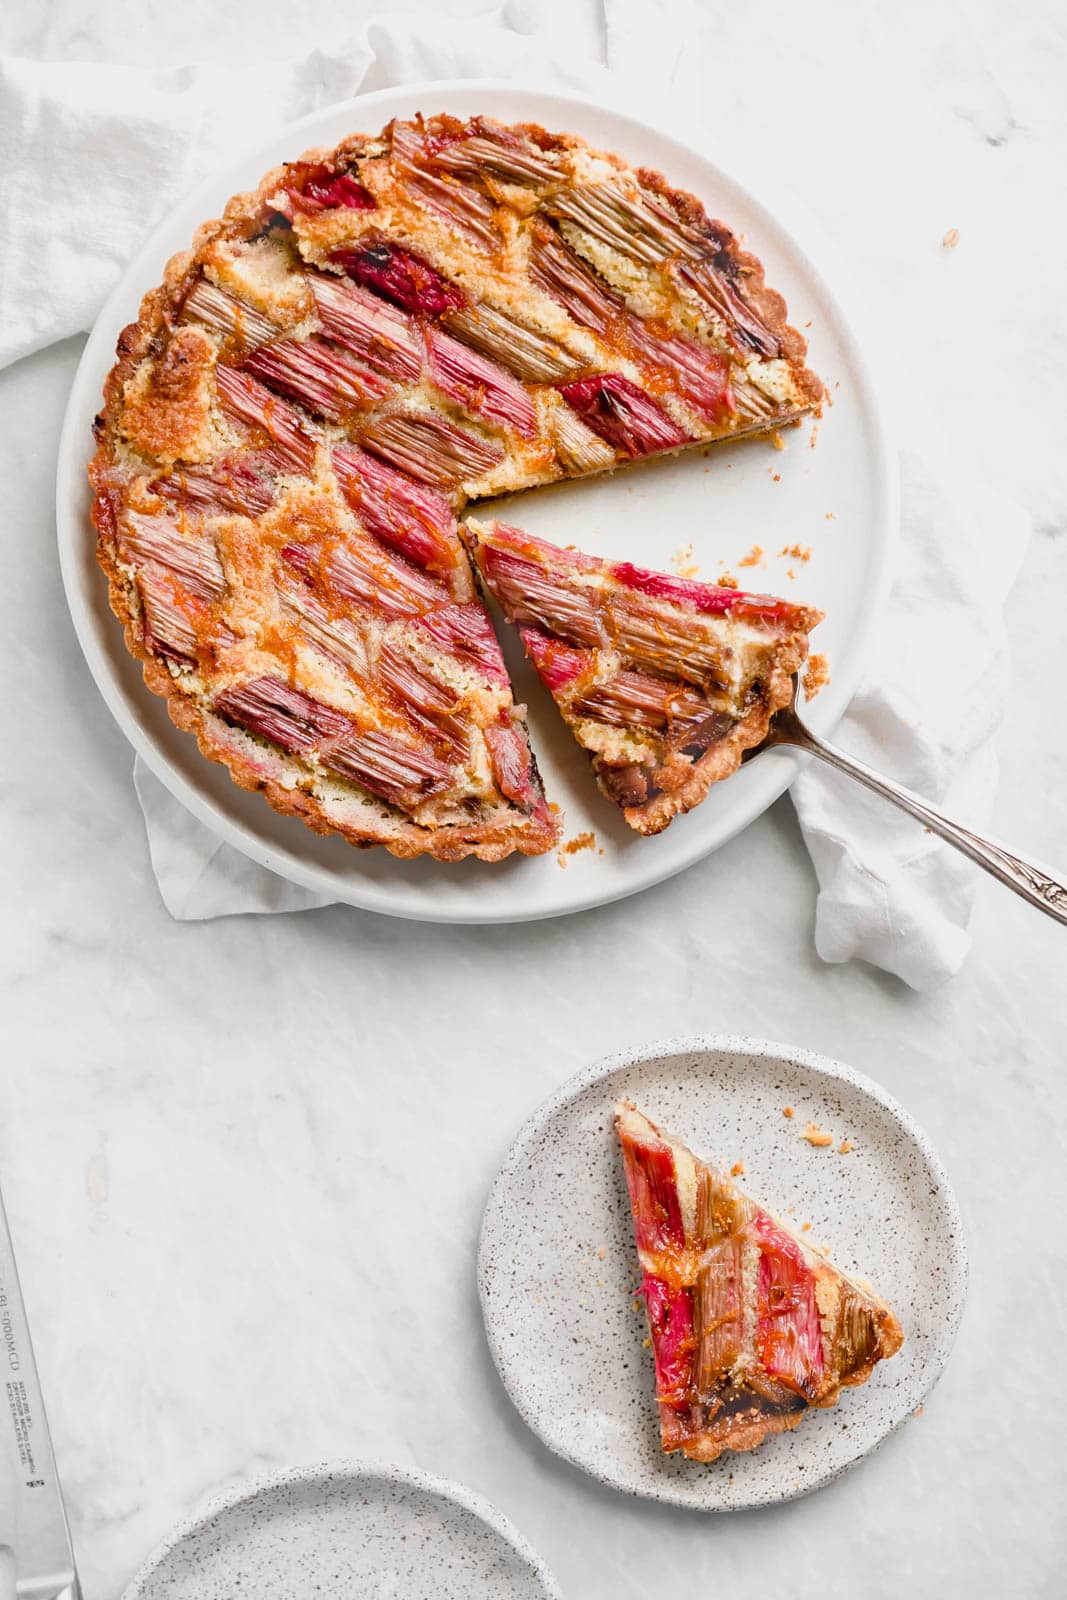 The most showstopping Rhubarb Bakewell Tart made with a pâte sucrée crust, strawberry preserves, almond frangipane, and an orange-soaked rhubarb top